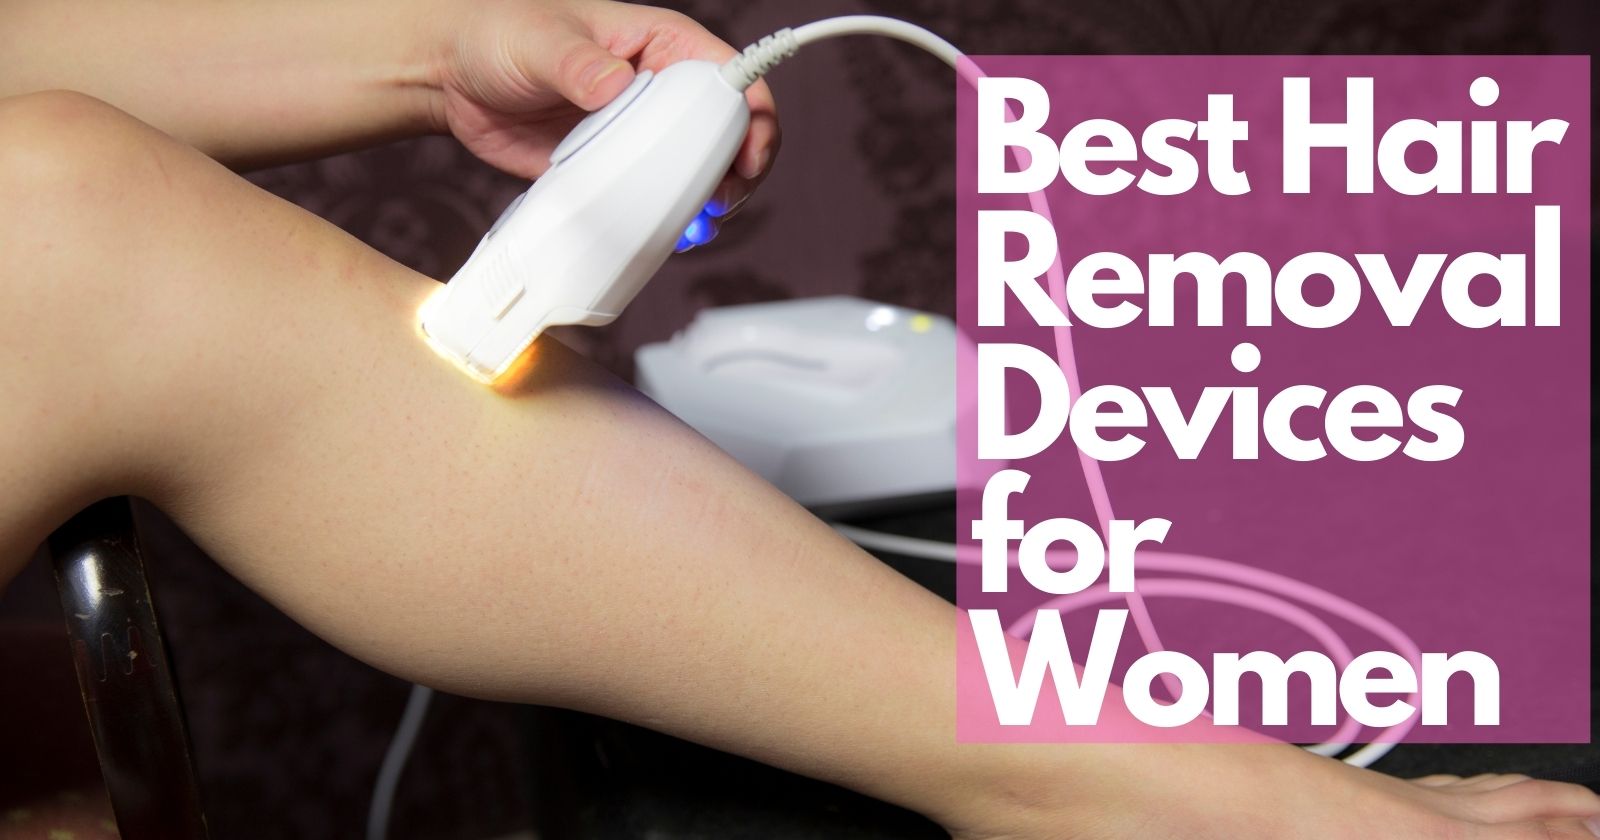 Best Hair Removal Devices for Women